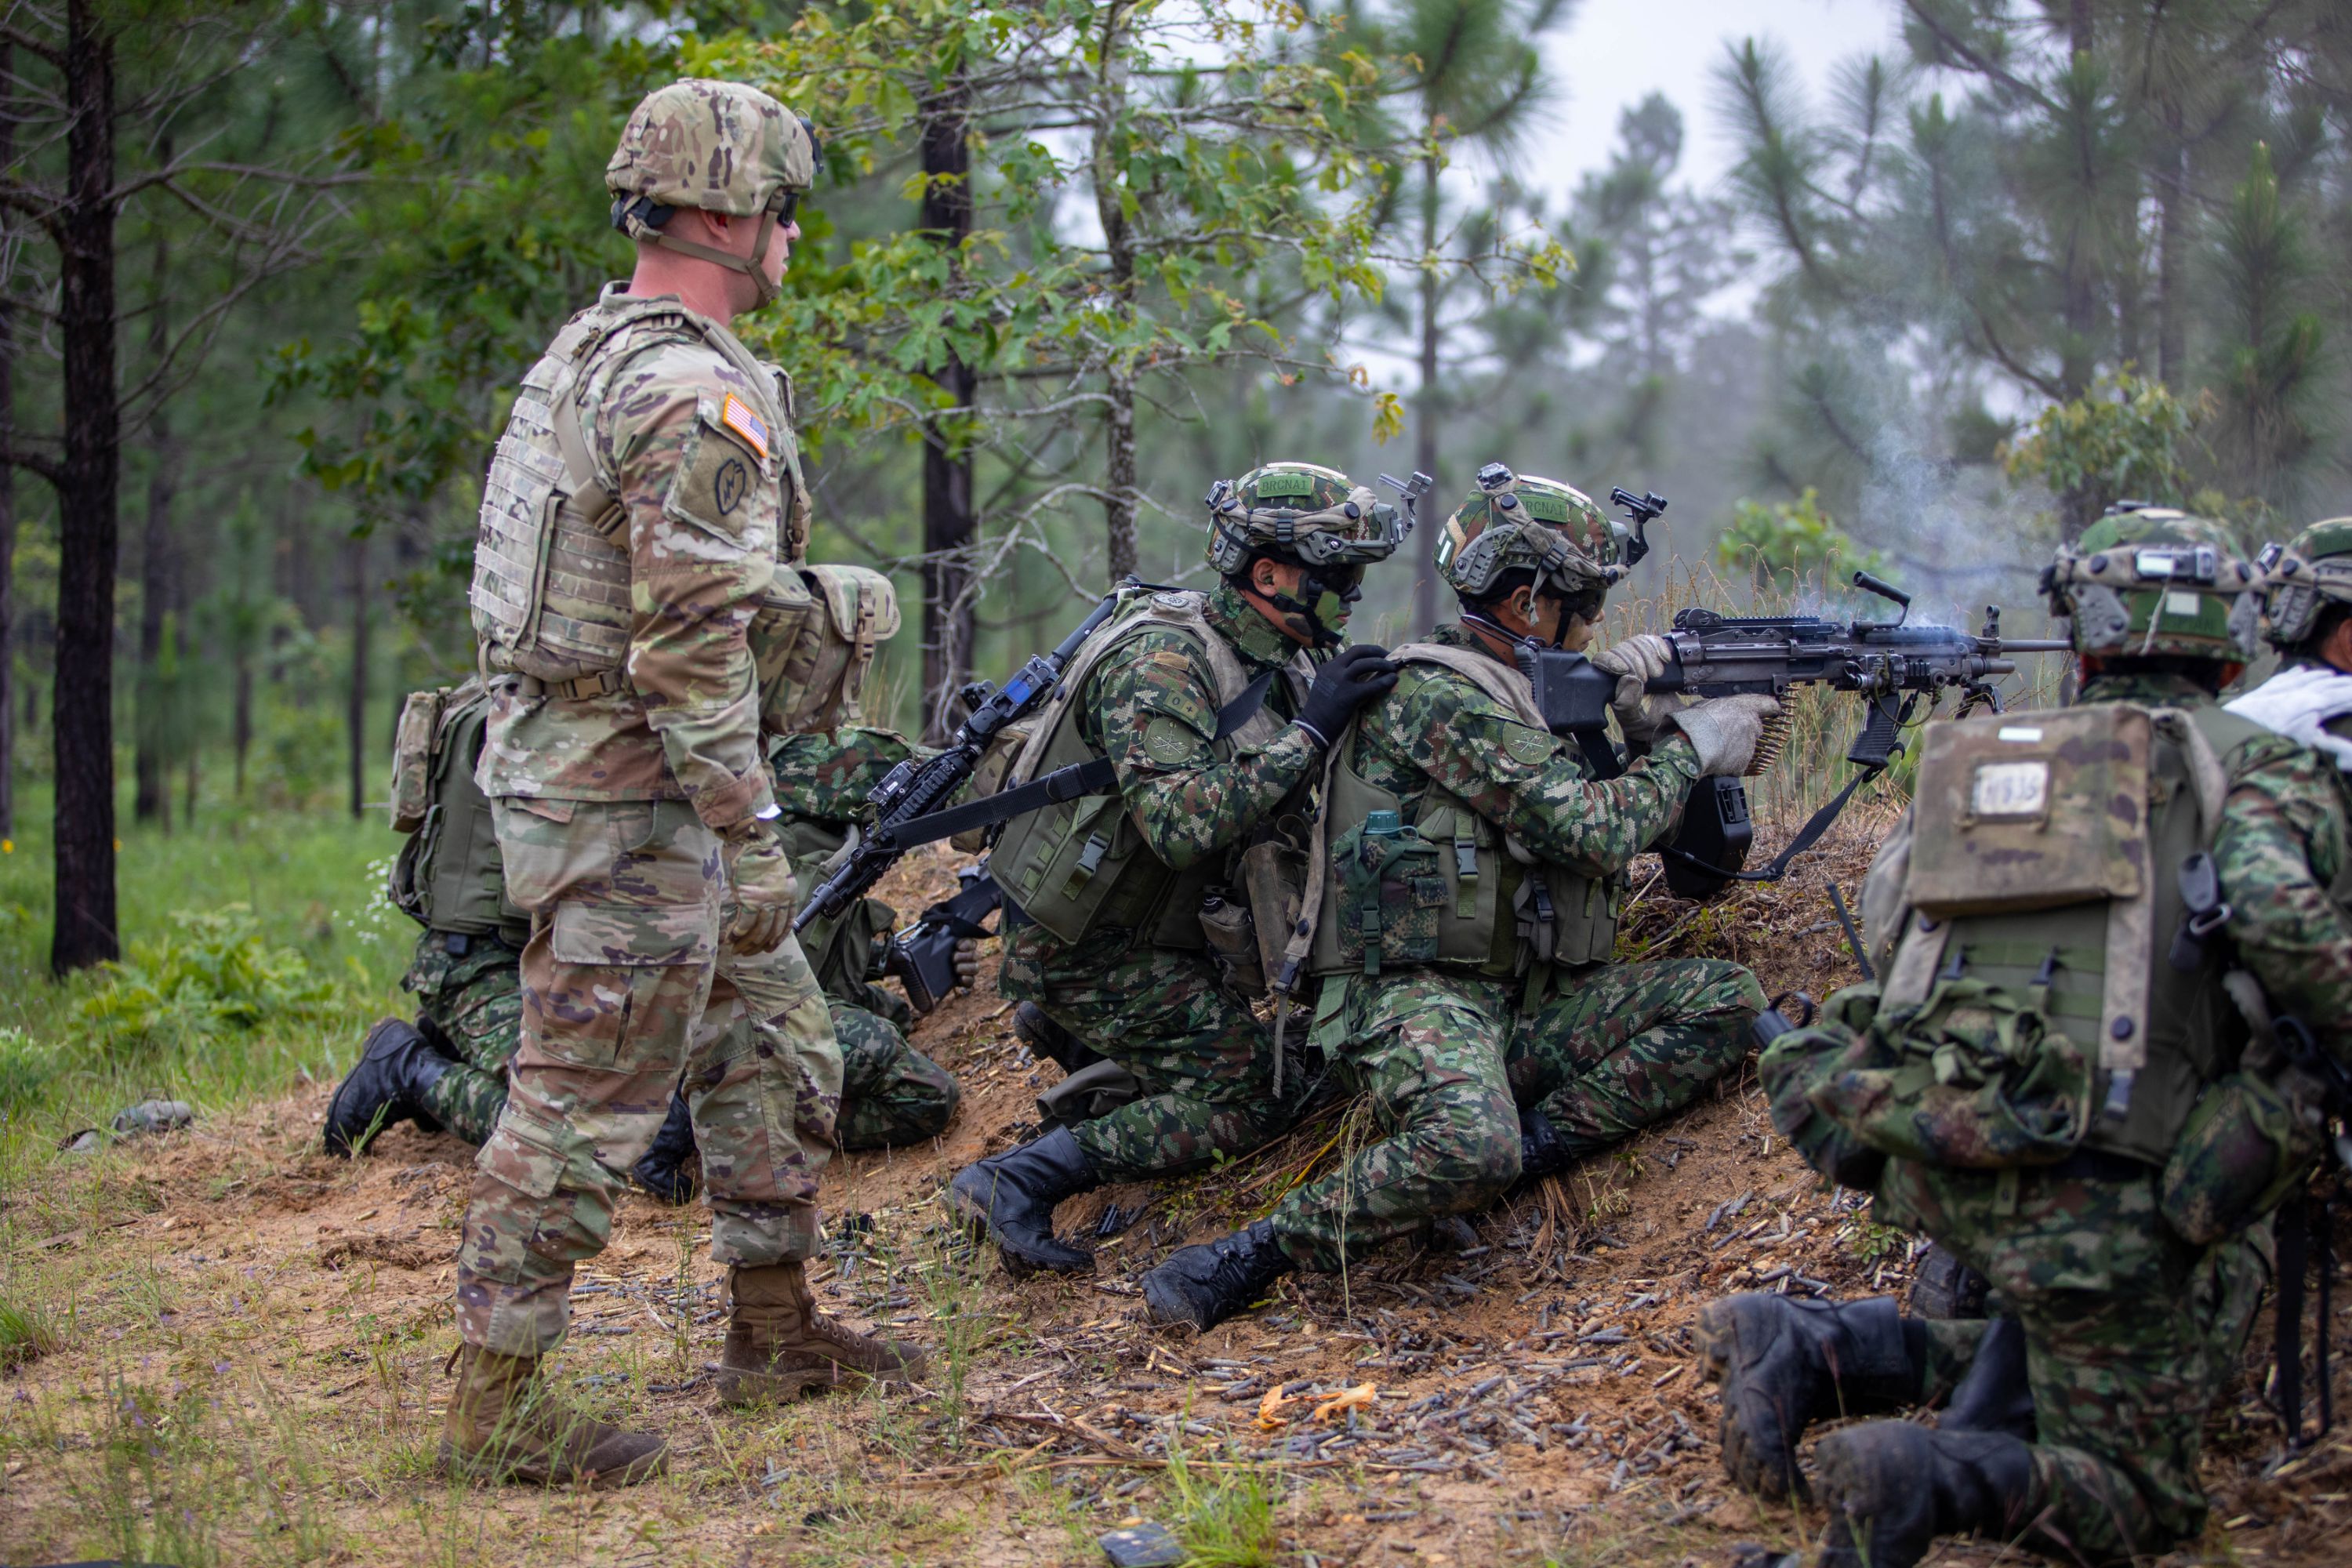 A U.S. Army Soldier observes a group of Colombian and U.S. Soldiers conduct a live fire training lane during their Joint Readiness Training Center rotation at Fort Polk, La. on May 5, 2023. (U.S. Army photo by Sgt. 1st Class Alan Brutus)